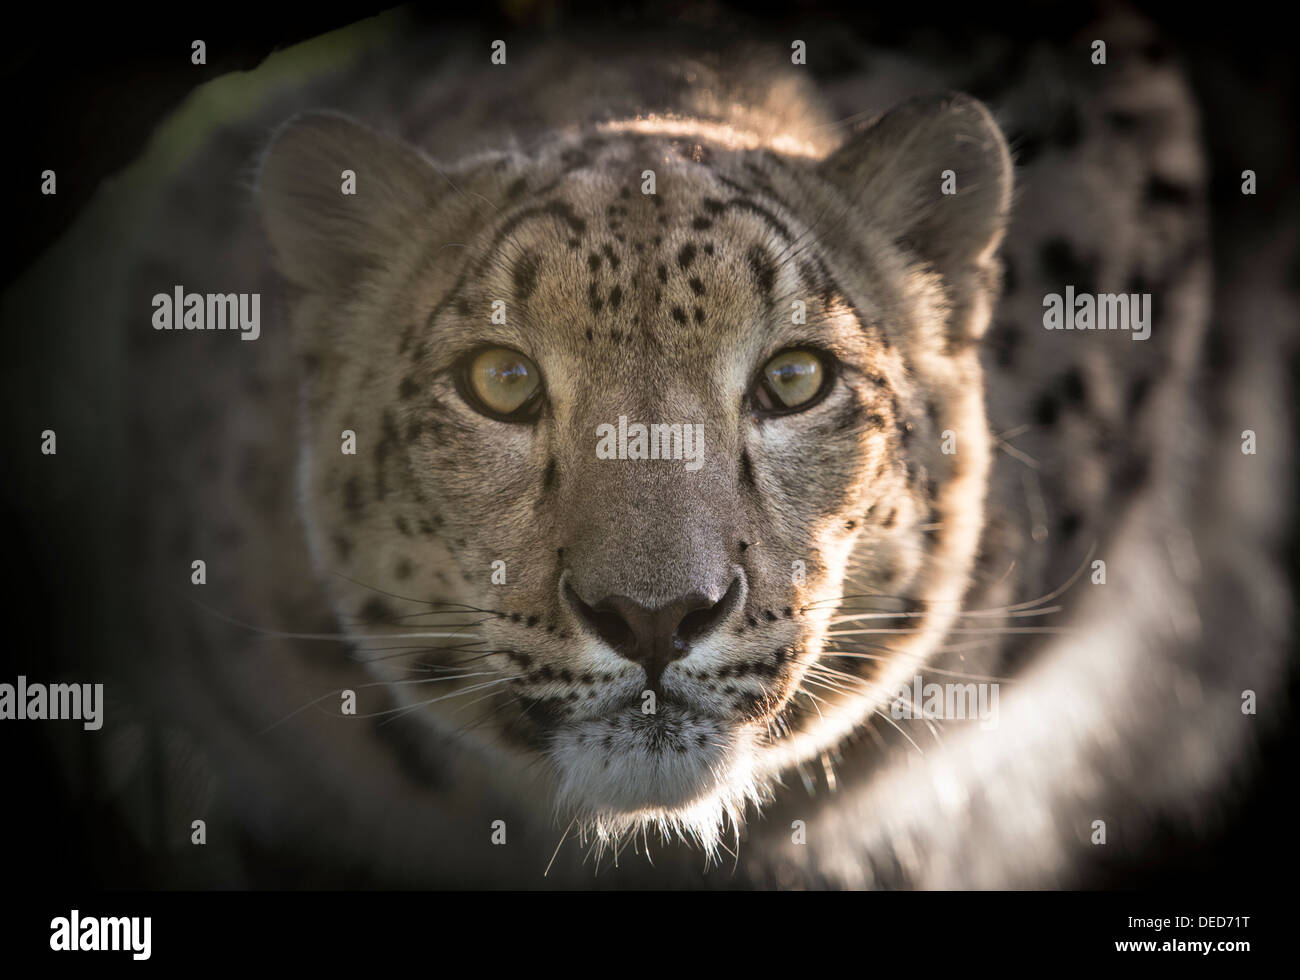 Female snow leopard staring at camera, ready to pounce Stock Photo